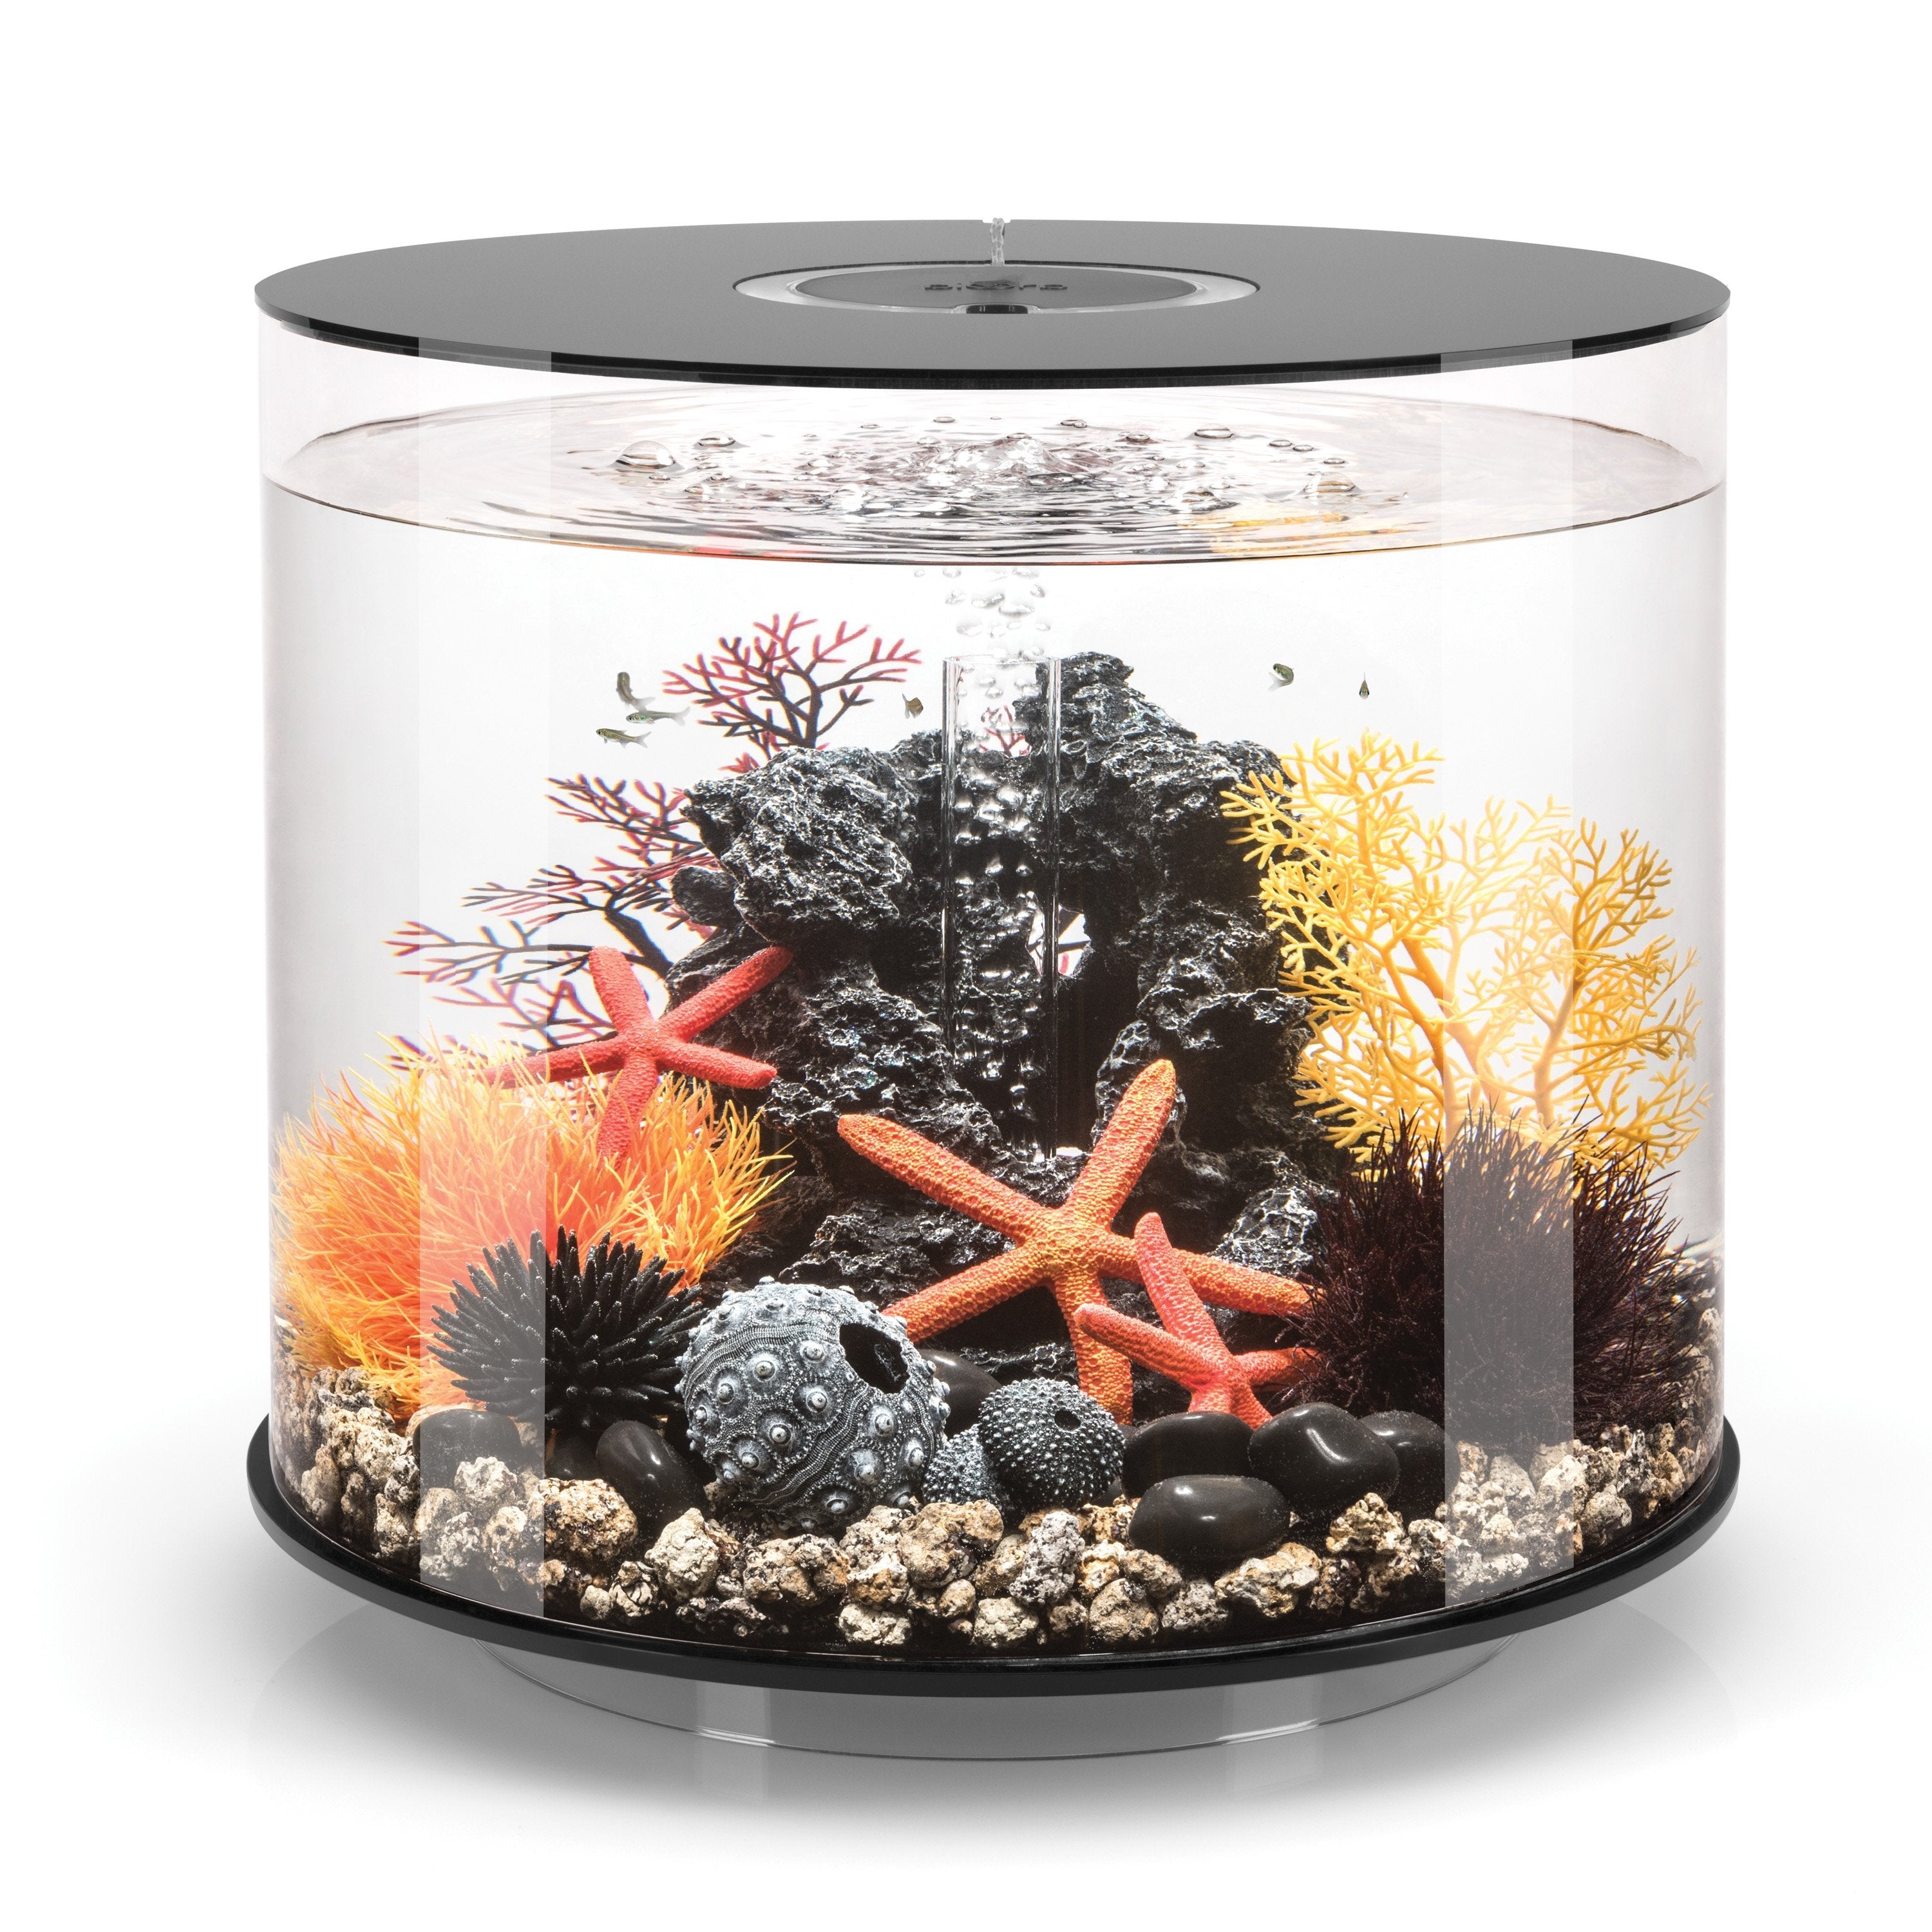 TUBE 35 Aquarium with Standard Light - 9.2 gallon available in Black